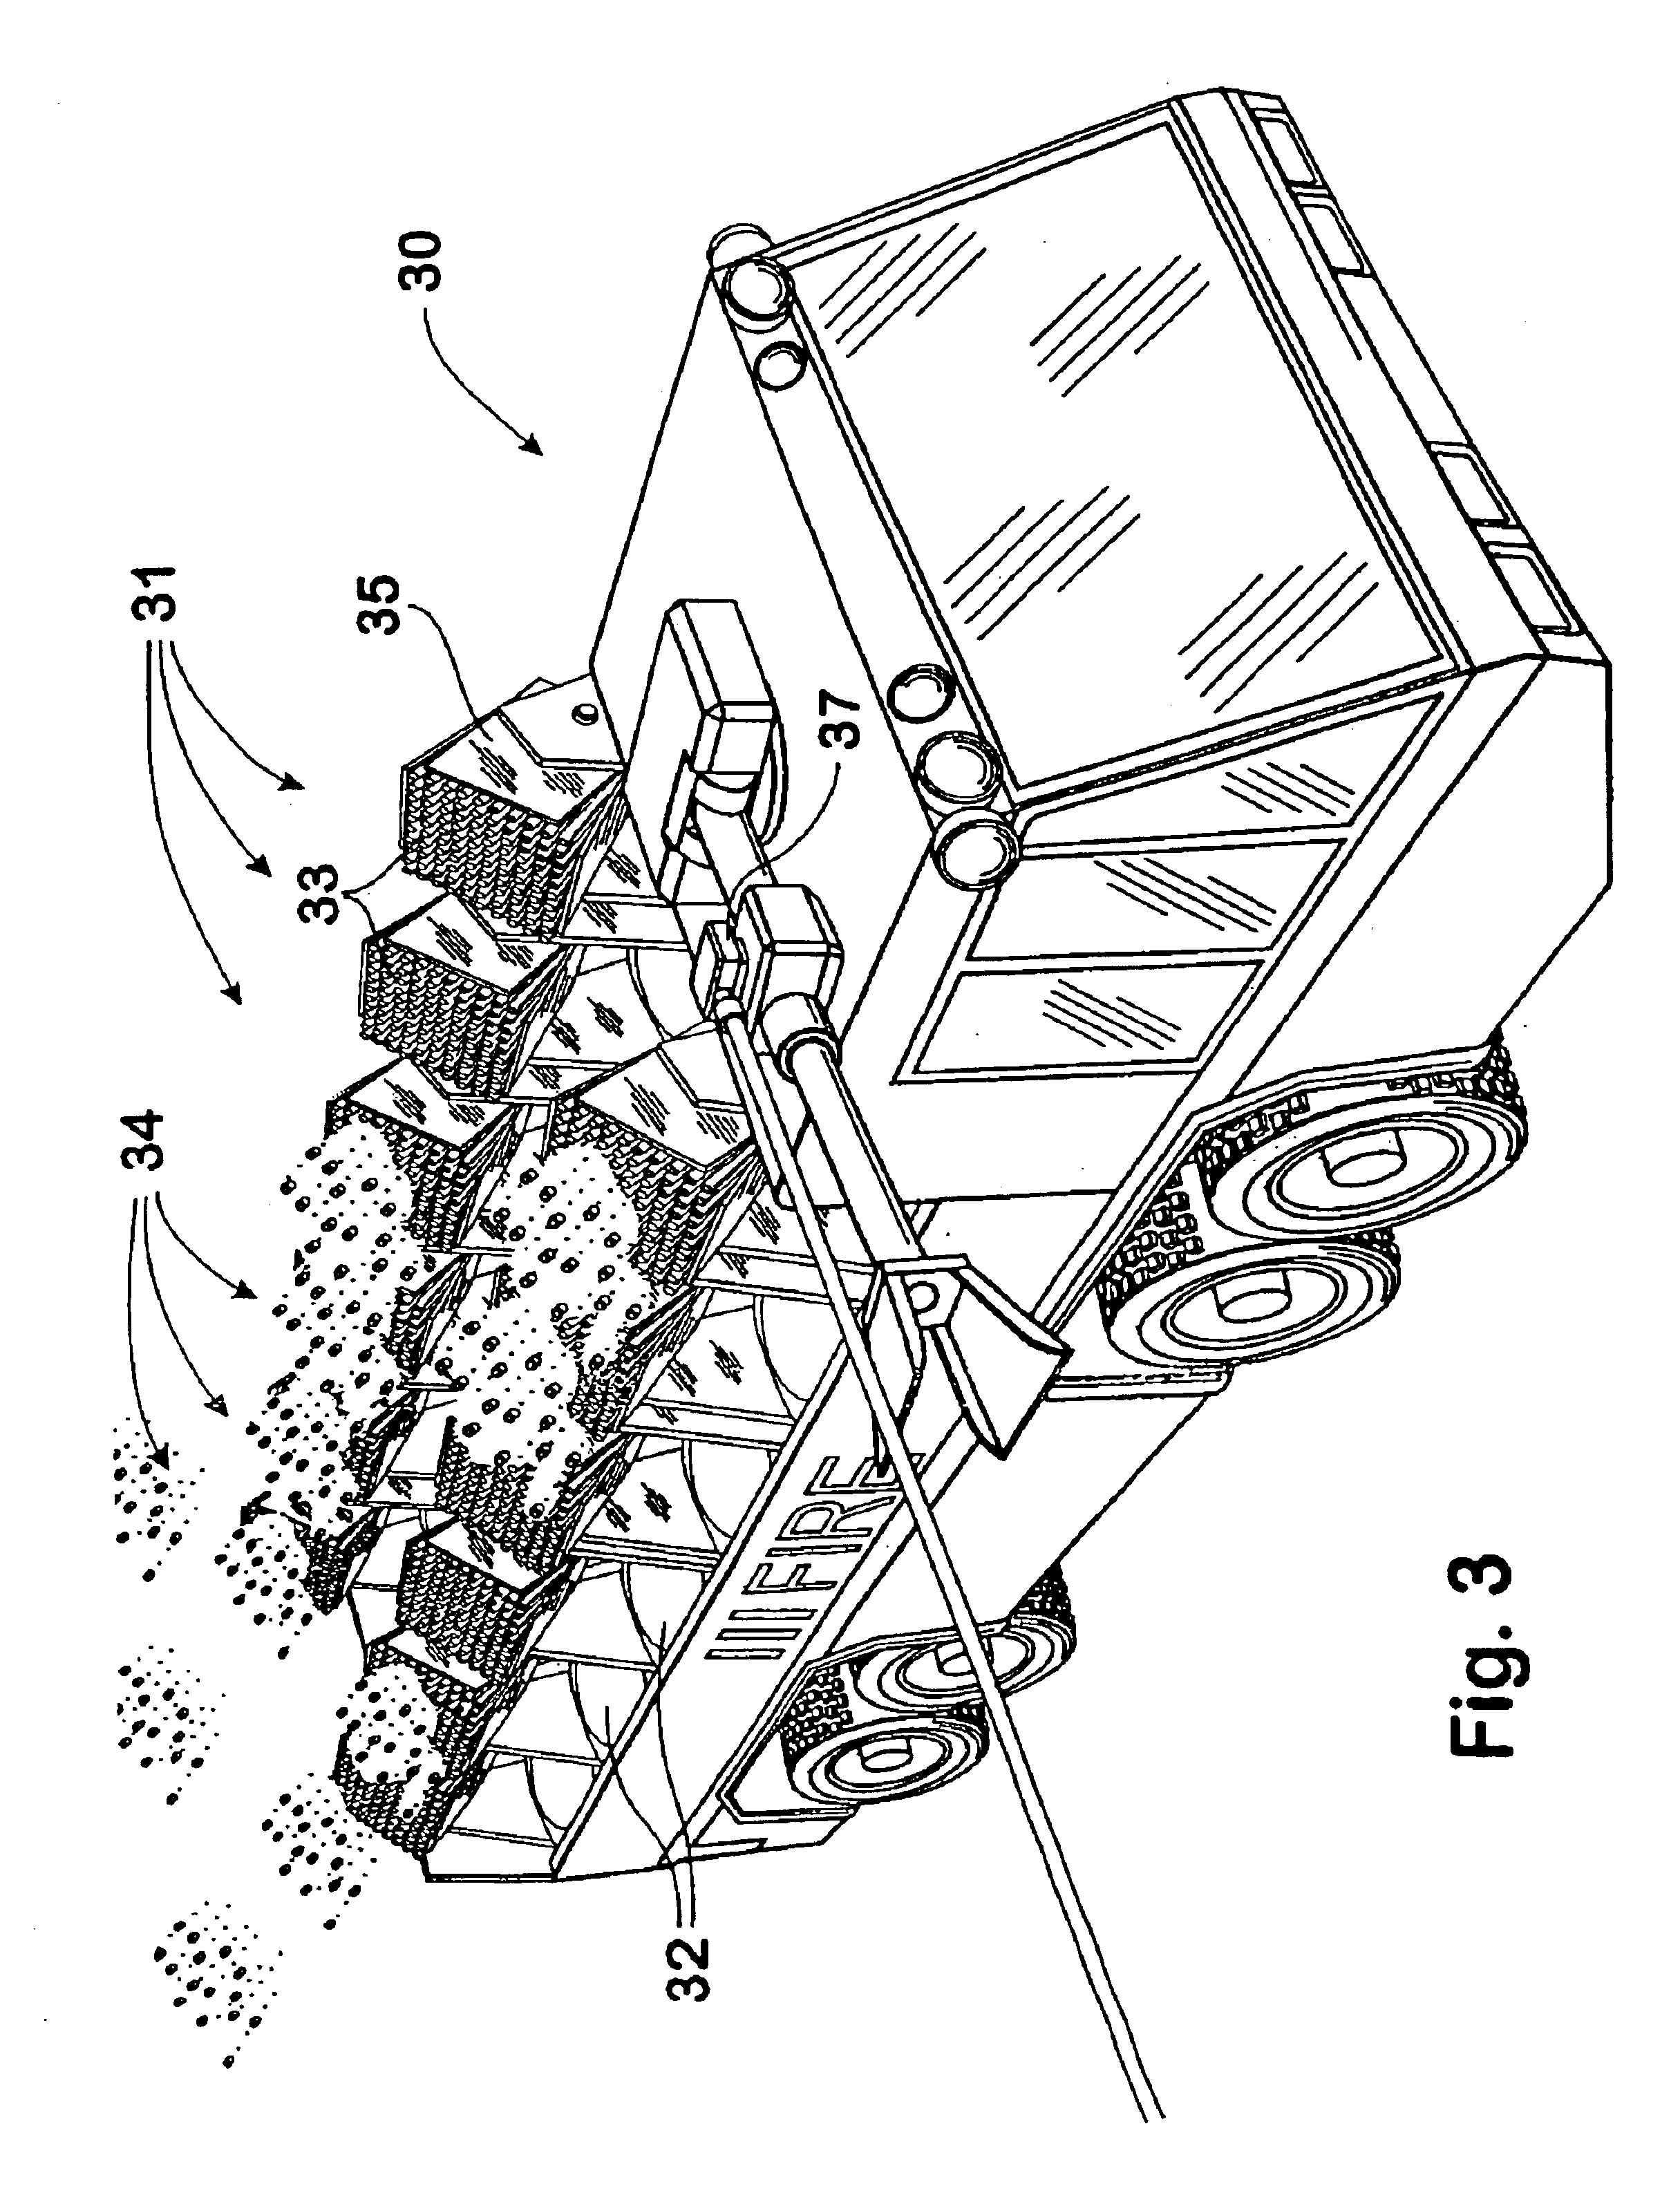 Projectile launching apparatus and methods for fire fighting